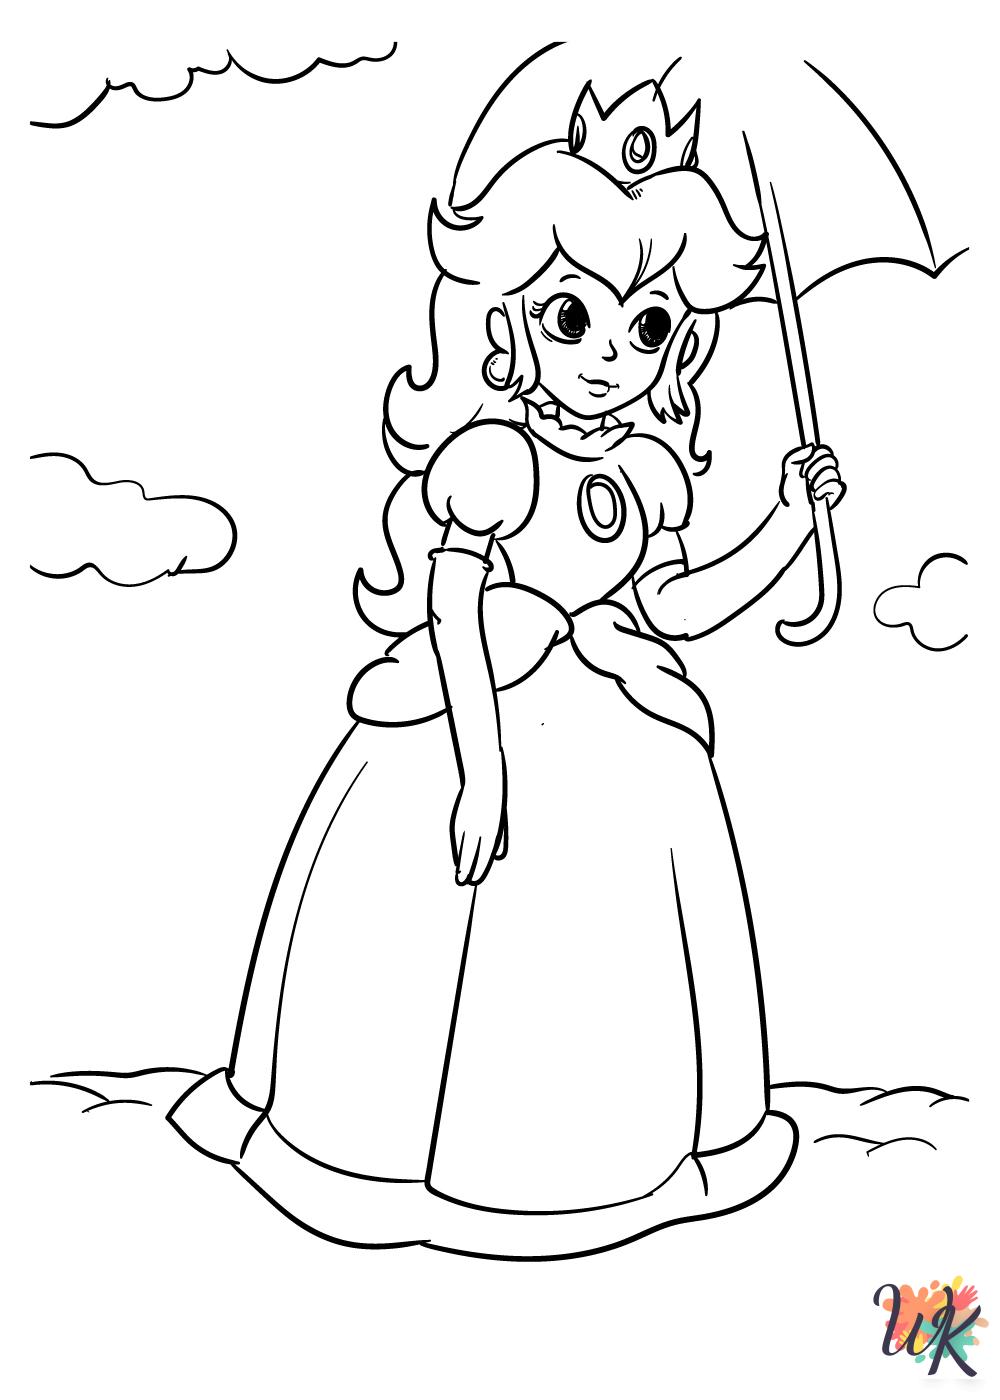 Princess Peach Coloring Pages 36